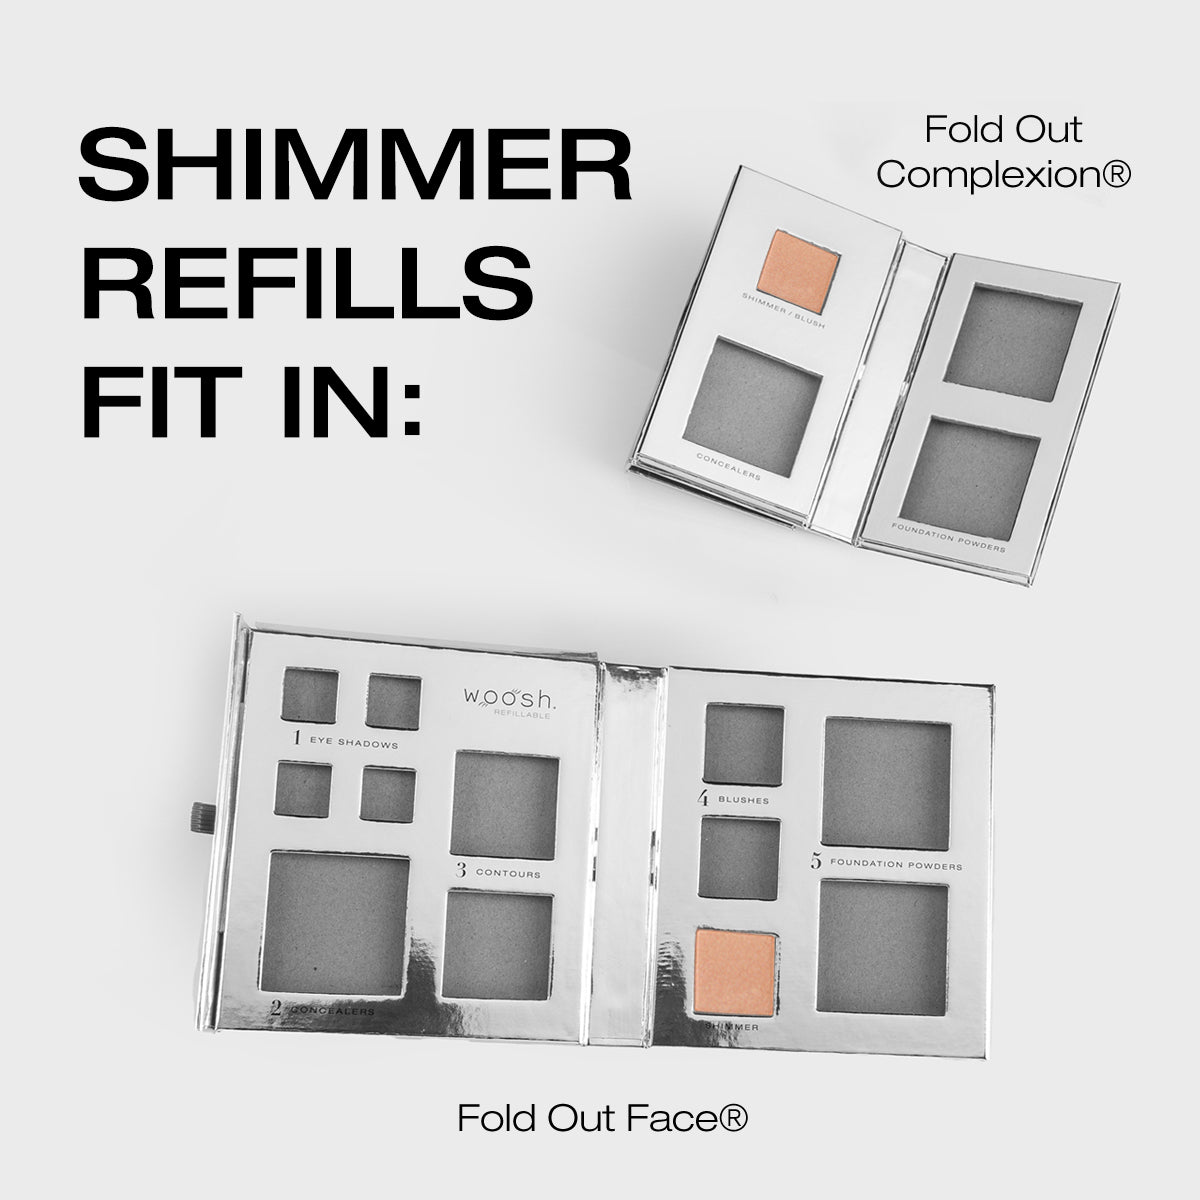 Shimmer refills fit in the fold out complexion and fold out face